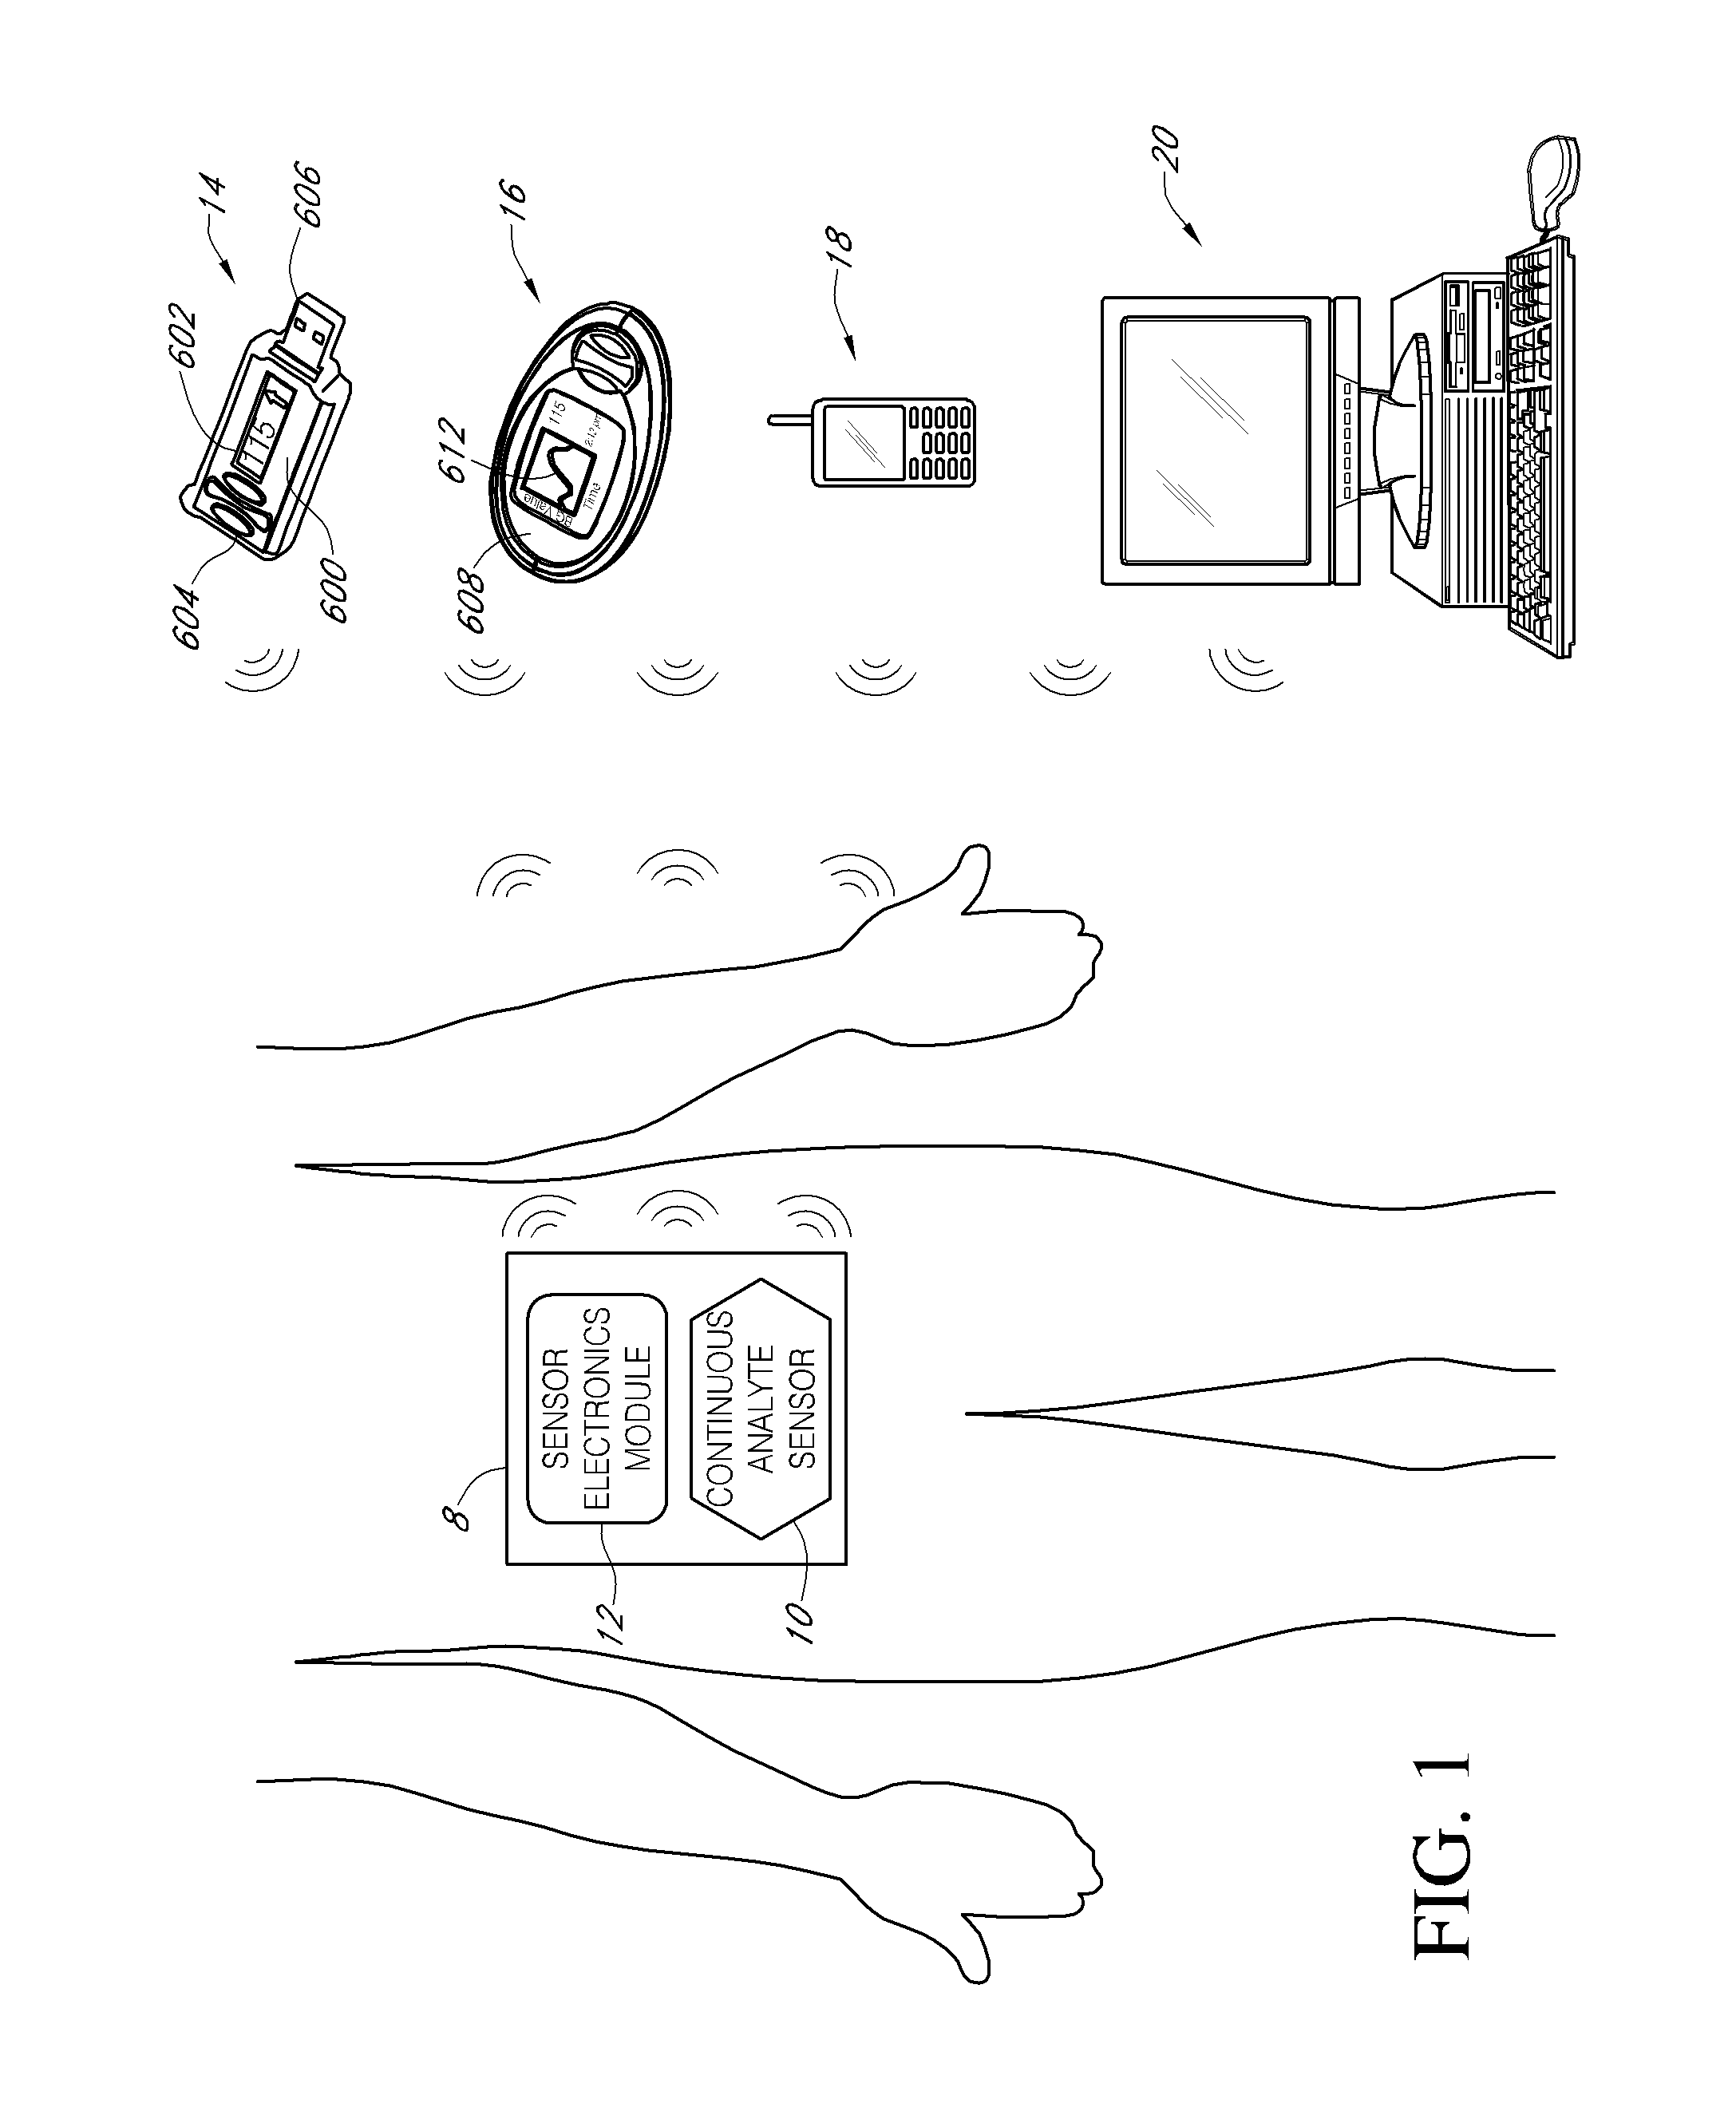 Systems and methods for processing, transmitting and displaying sensor data